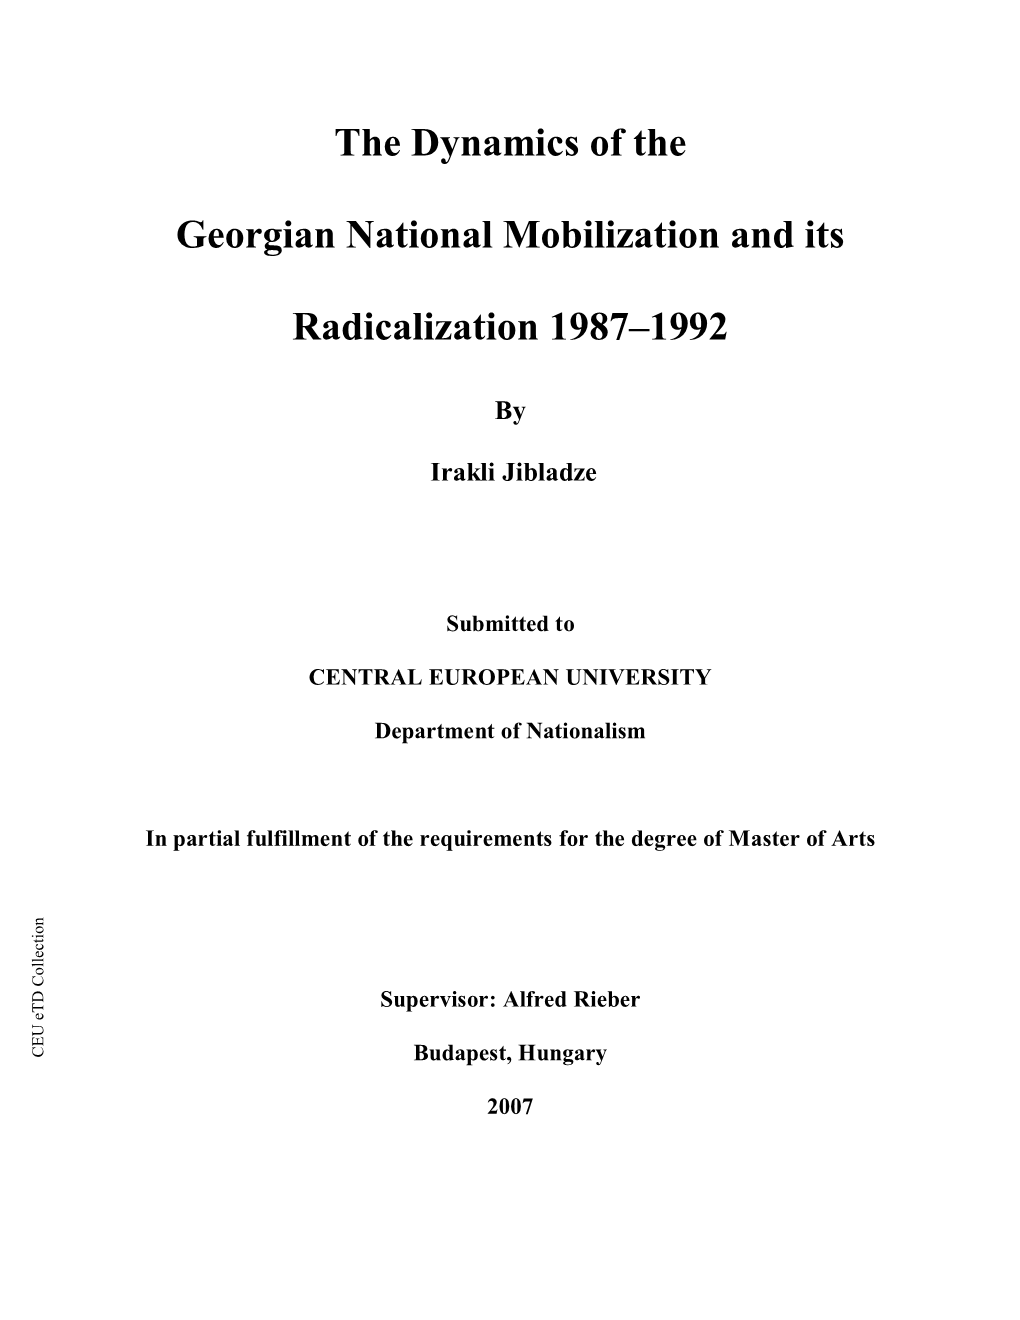 The Dynamics of the Georgian National Mobilization and Its